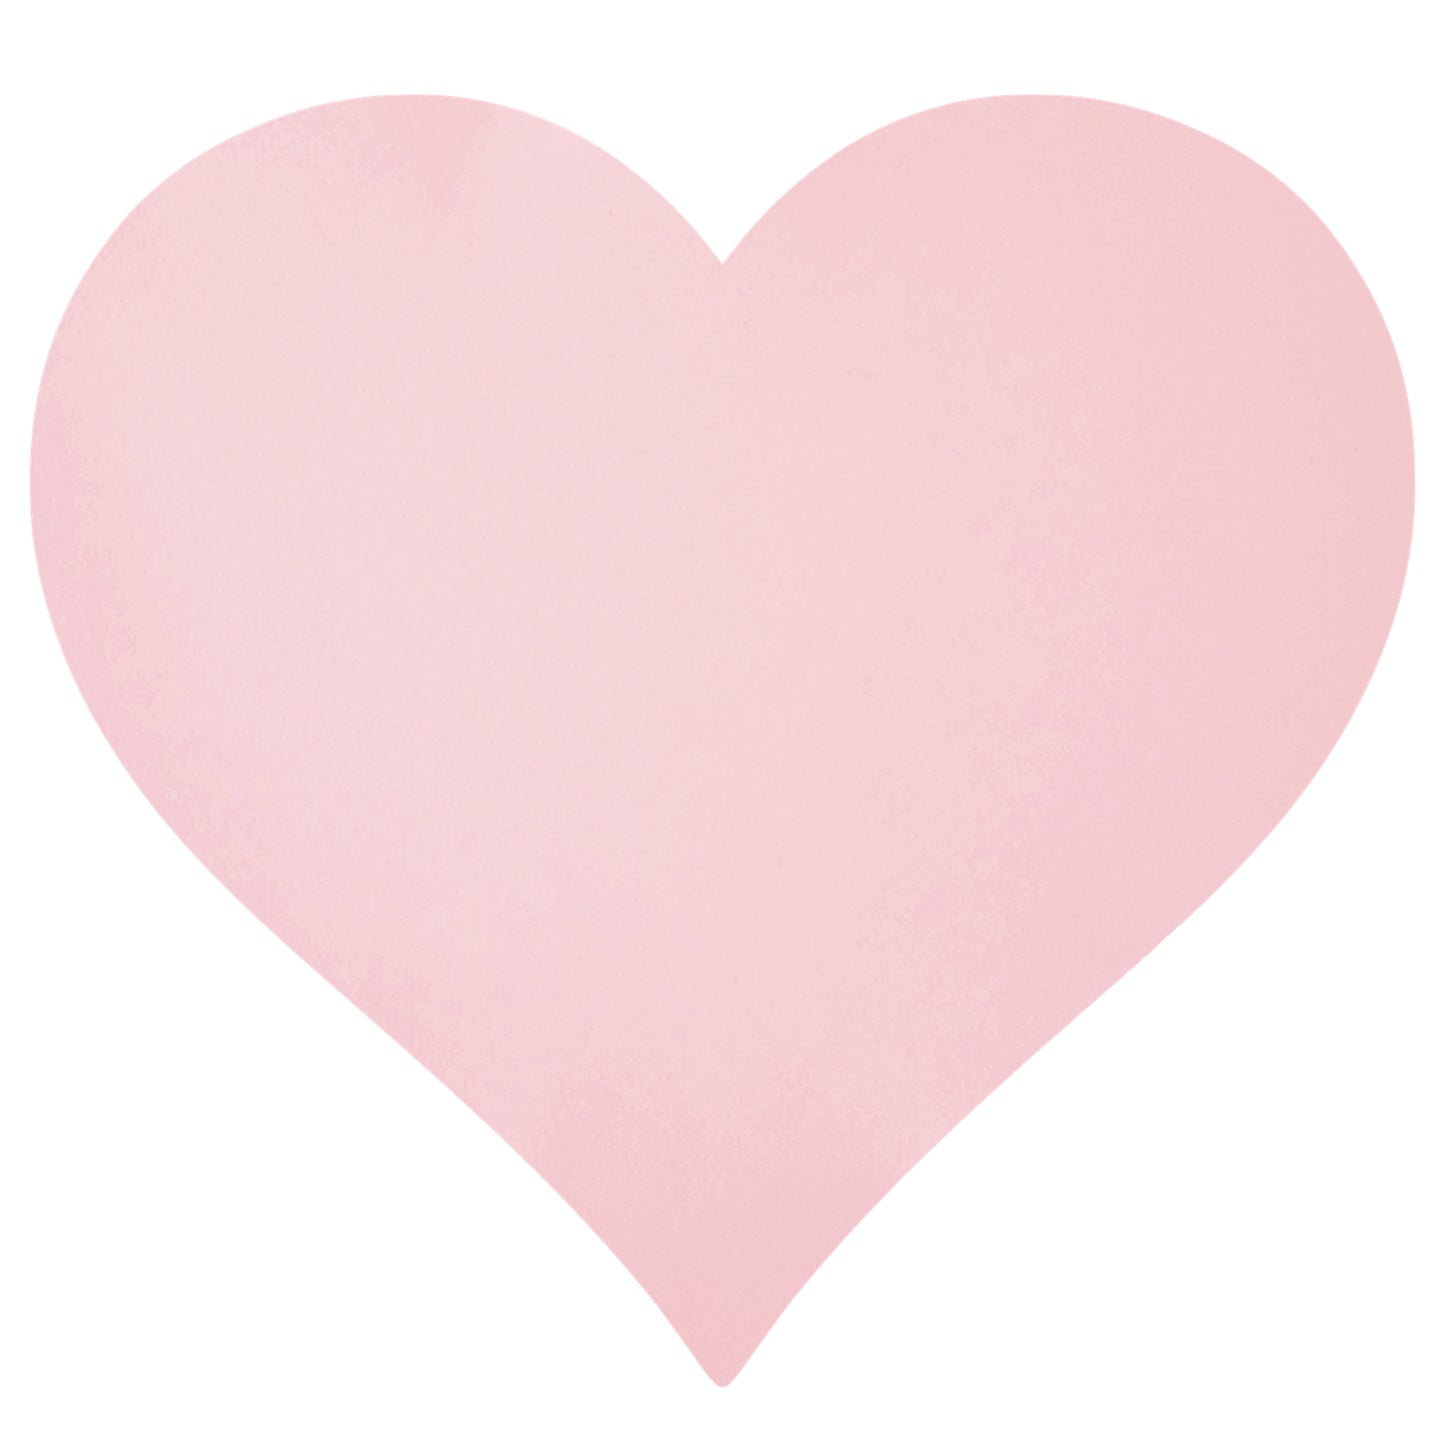 Die-Cut Pink Heart Placemat